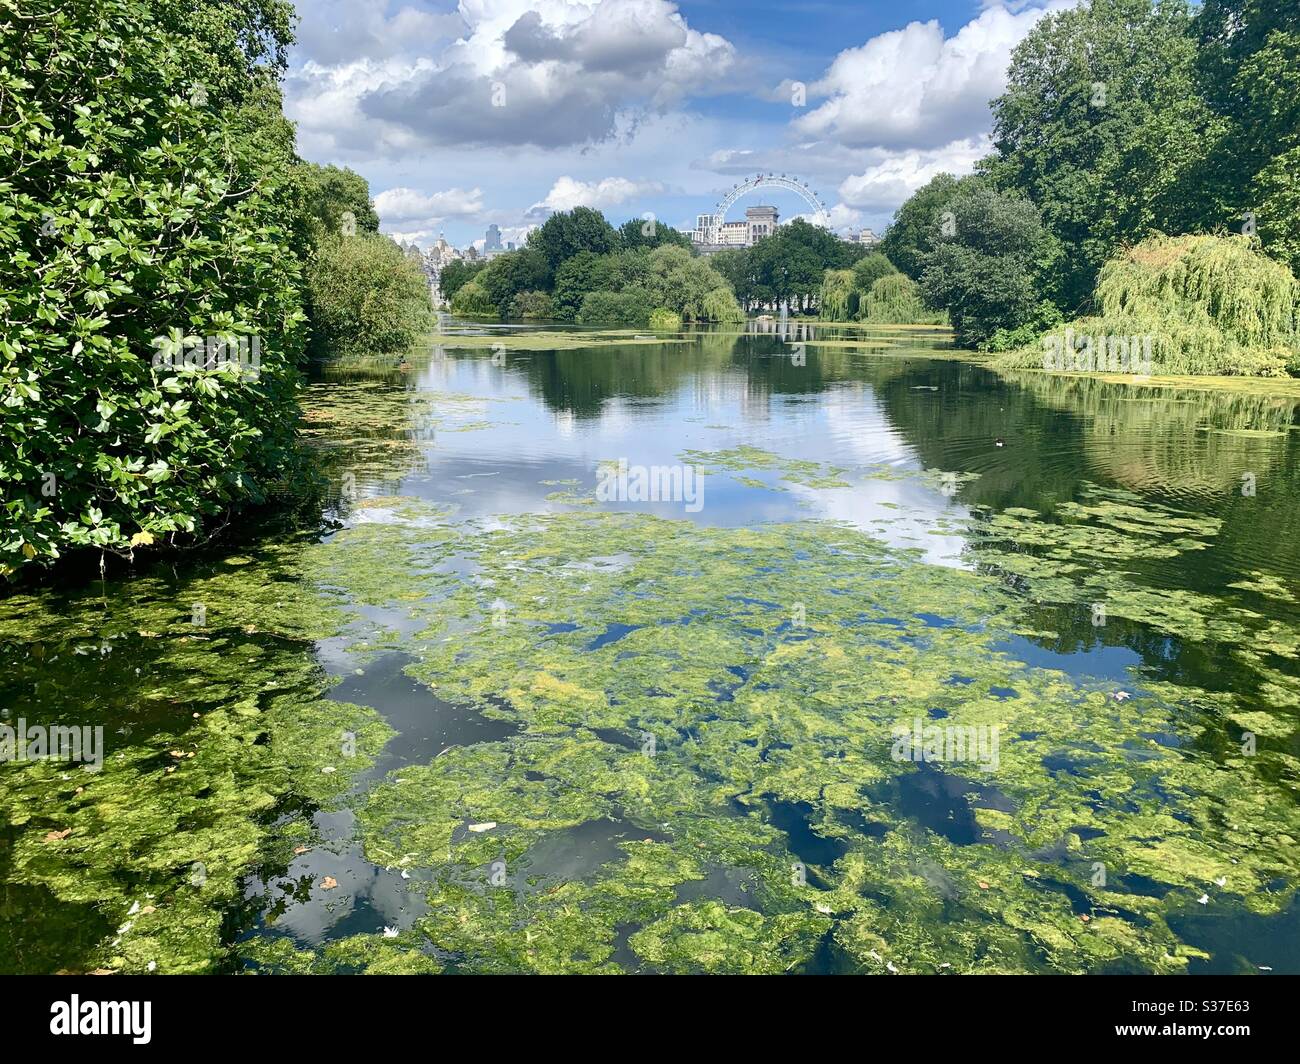 St James park pond weed Stock Photo